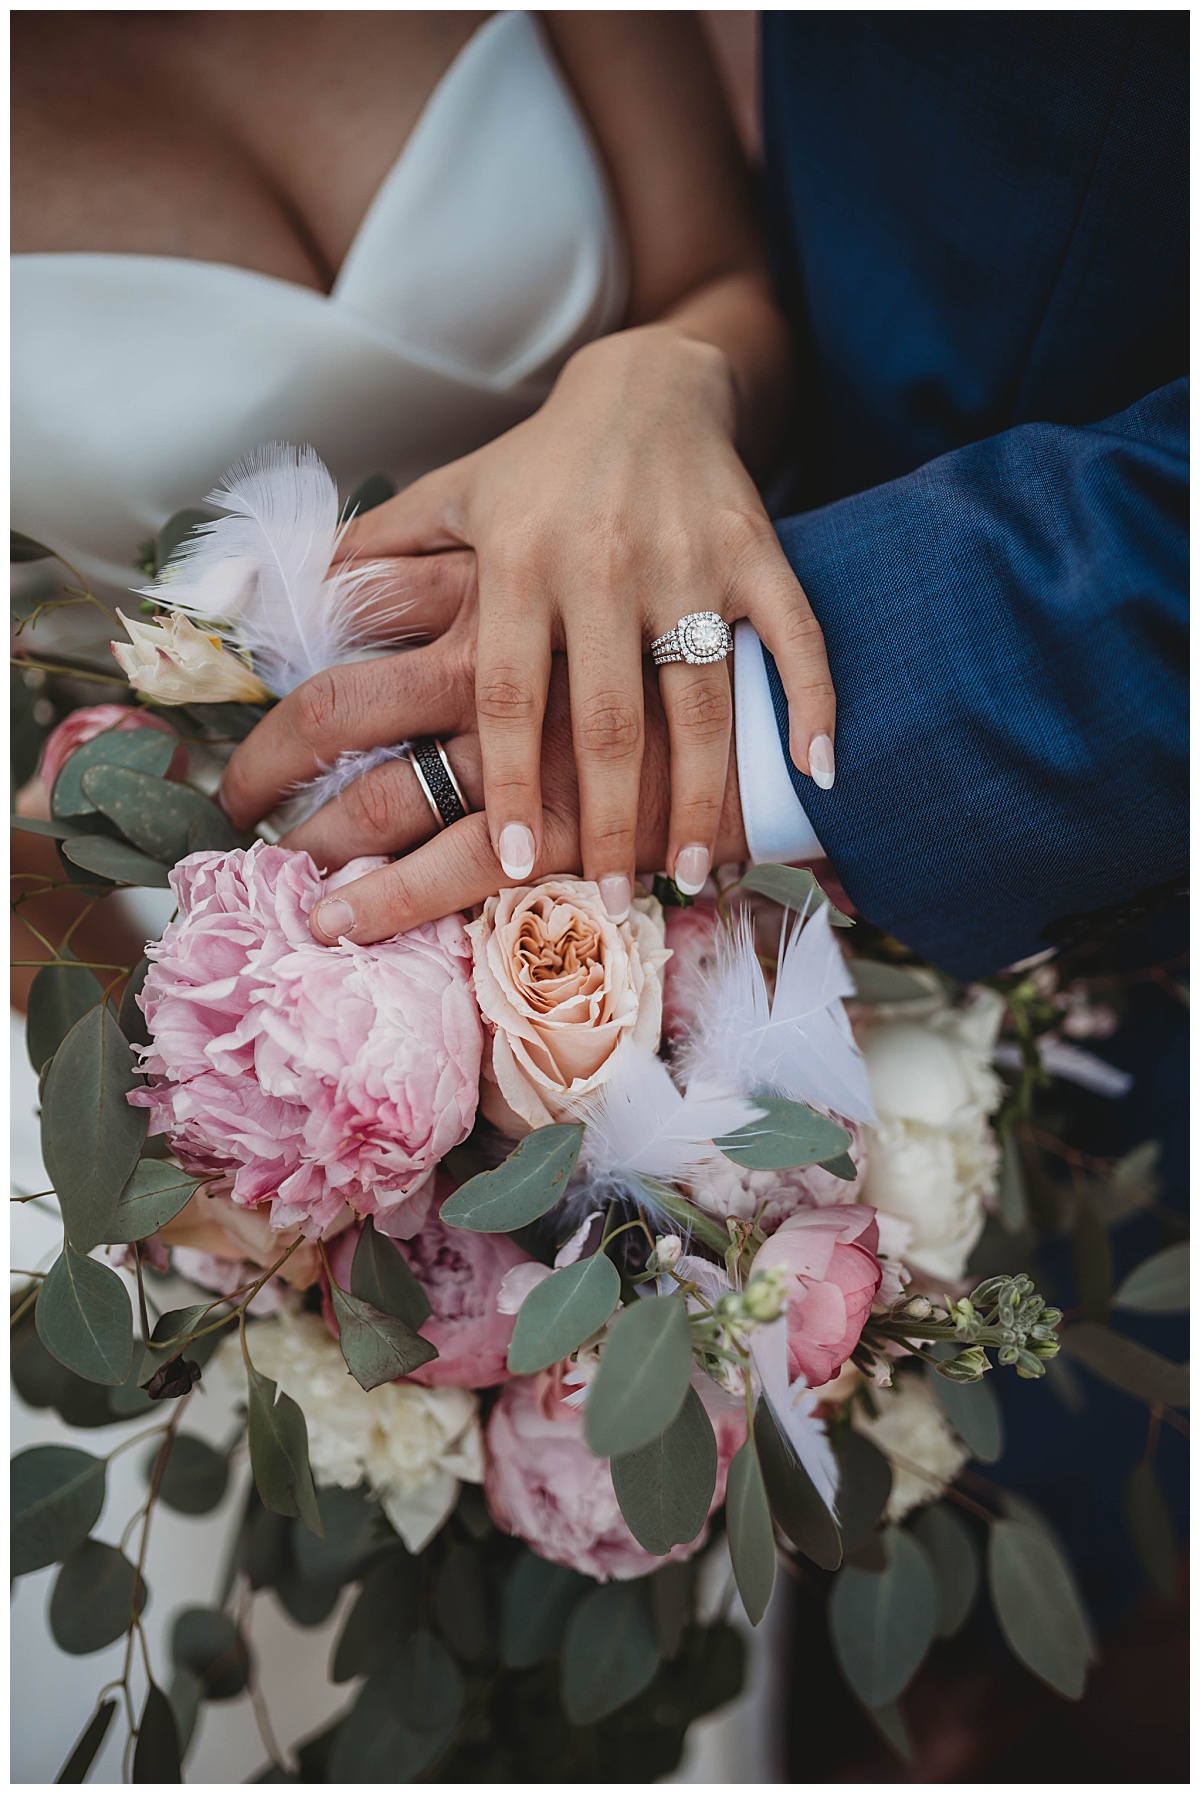 Hands with rings rest on bridal florals at upscale Texas wedding